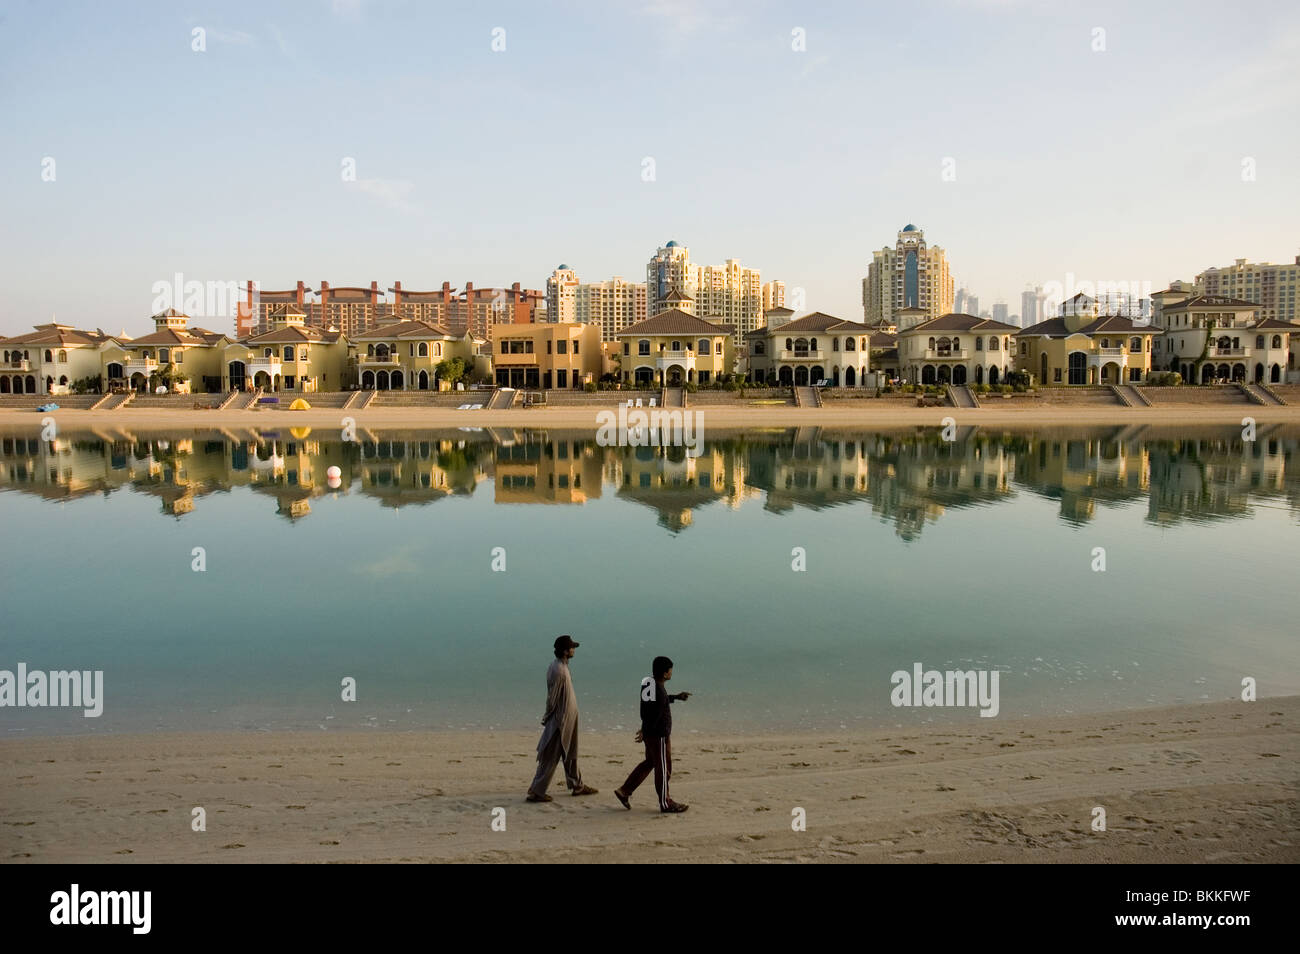 Two men walk along the beach on a frond of the Palm Jumeirah with houses on the Palm and the city of Dubai in the background Stock Photo